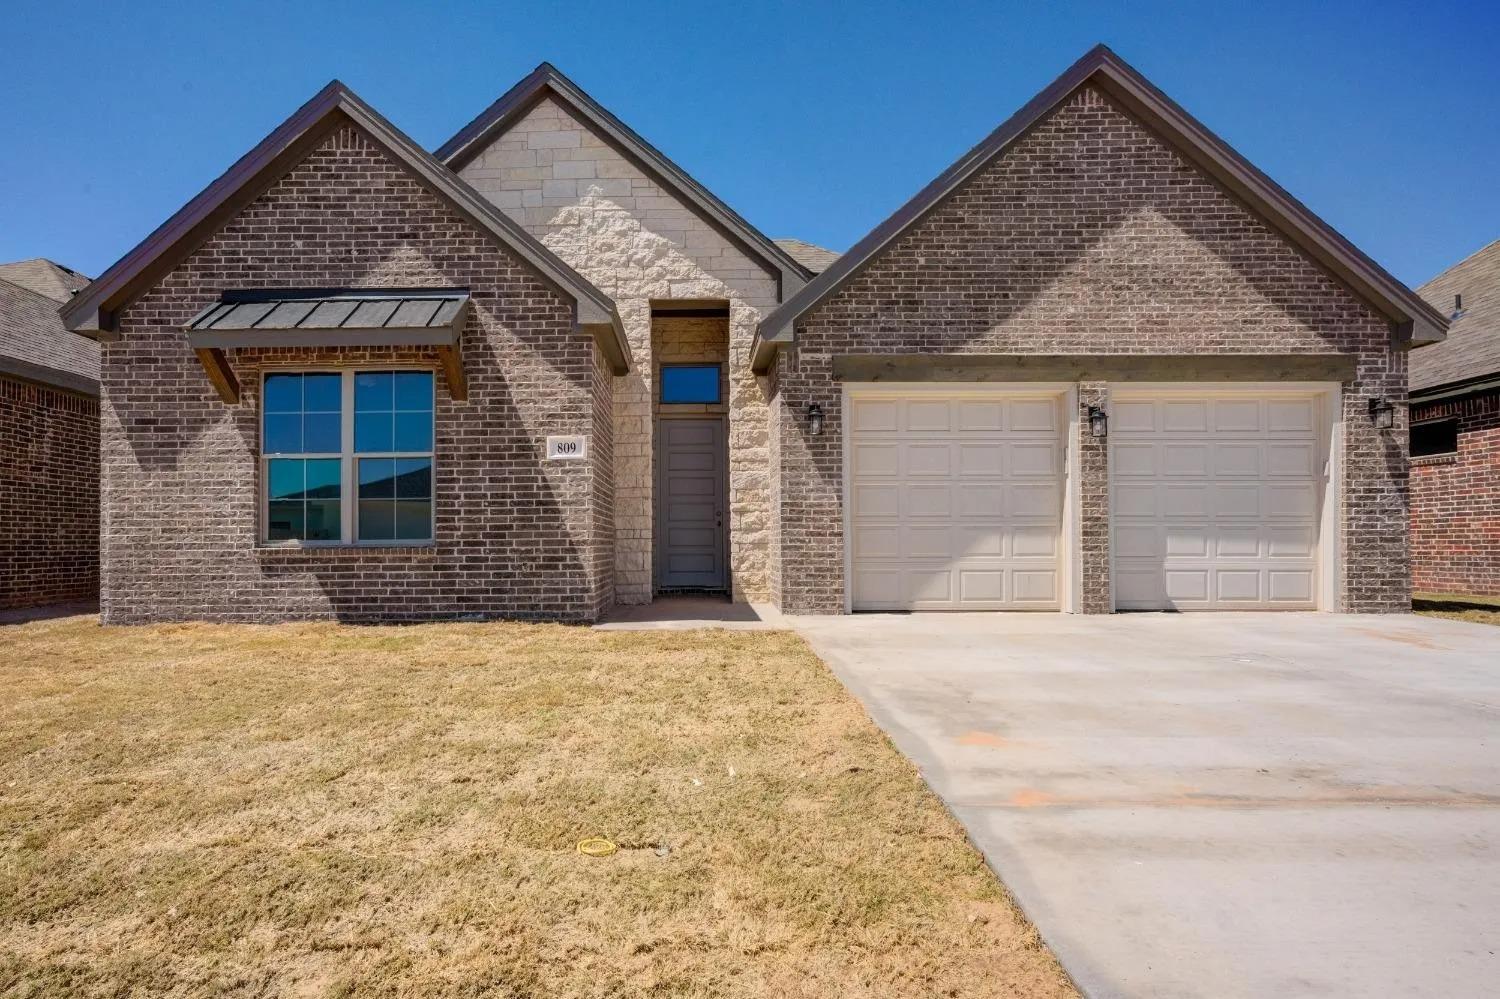 This home could qualify for a 4.5% interest rate!! Just minutes from shopping, dining, Texas Tech, the medical district, and Frenship Schools the location could not be better. From the minute you step inside this 3 bedroom, 2 bathroom home you will think spacious. The vinyl plank floors, carpeted bedrooms, custom tile fireplace, and quartz countertops throughout are just a few of the amenities this home has to offer. Right off the front of the house are two large bedrooms and a bathroom with double sinks. Then the isolated master features a separate soaking tub and shower, double sinks, and oversized his and hers closets! Book your tour soon!